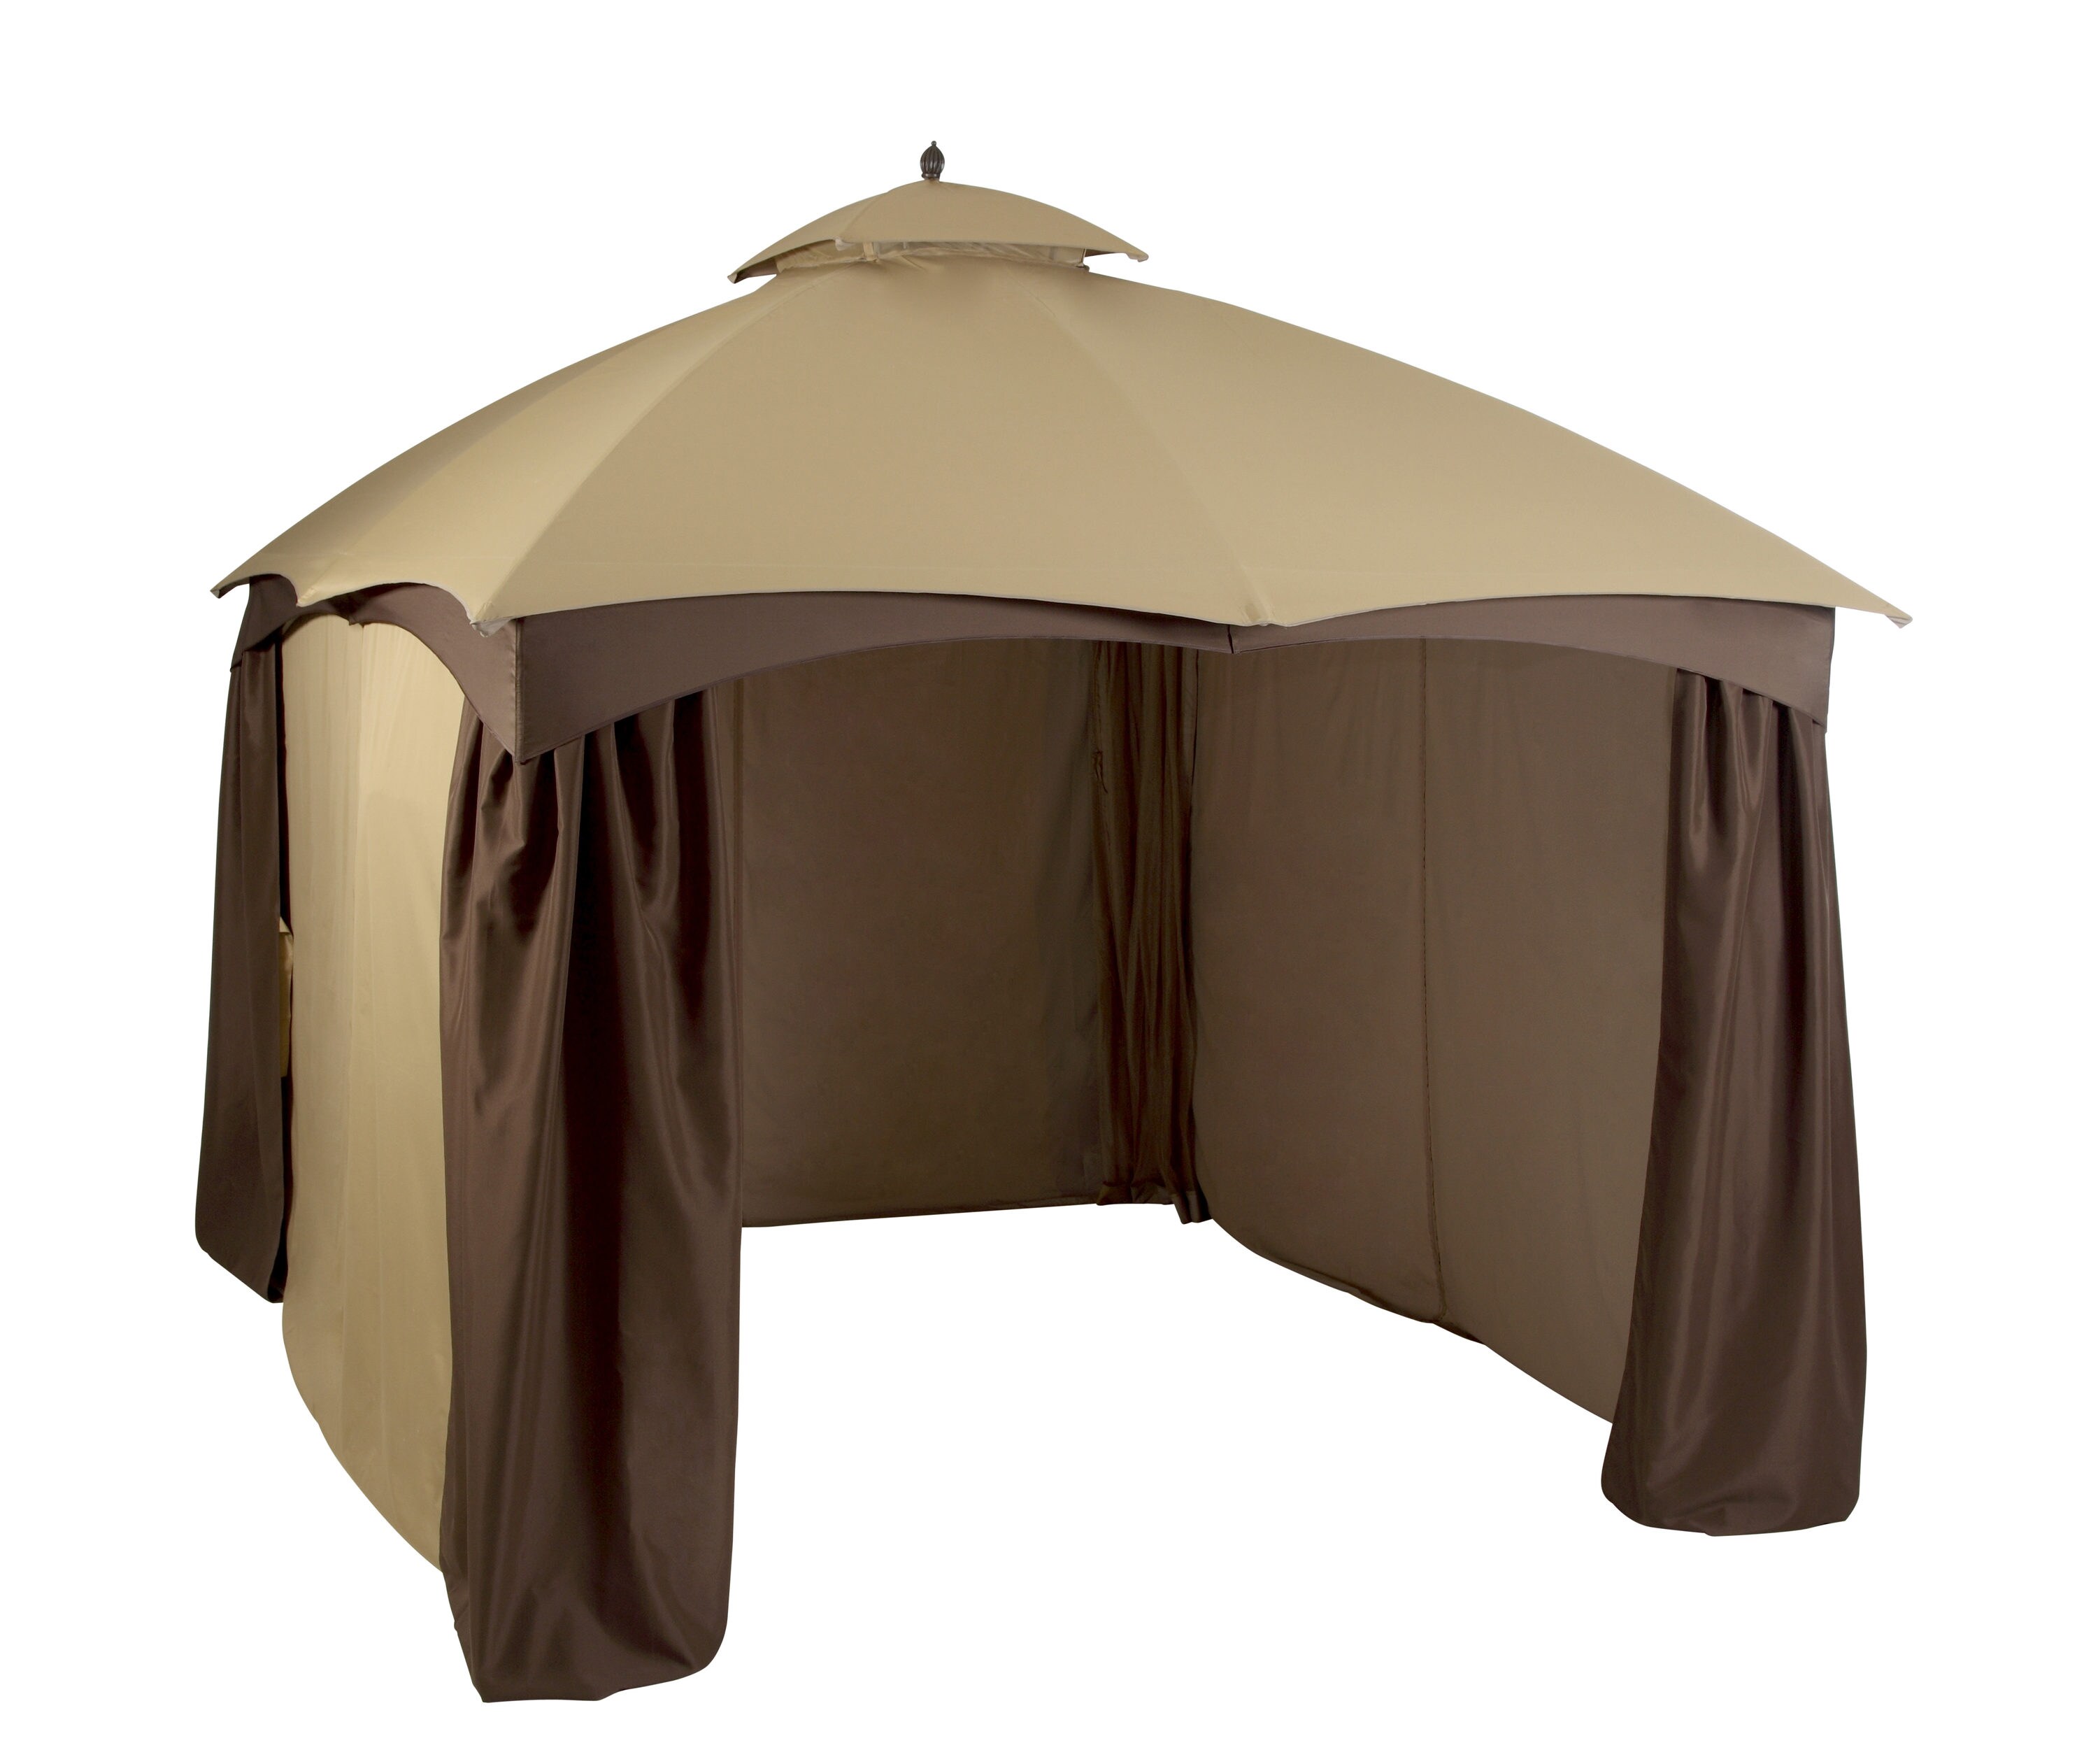 Details about   Outdoor Gazebo Top Canopy Replacement Tent For Lowes Allen Roth 10 X 12"  Beige